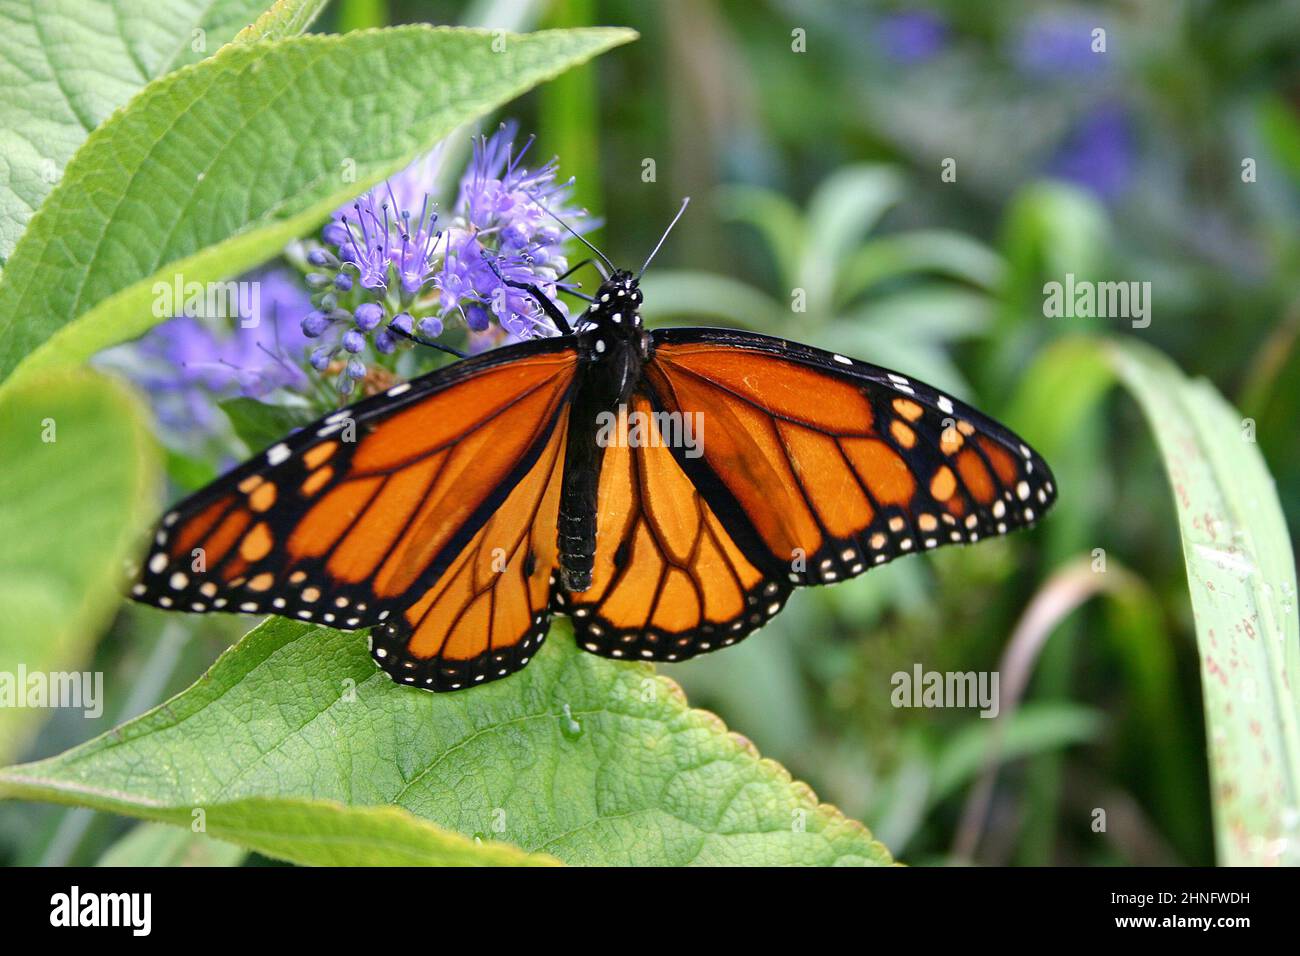 Close-up of a magnificently beautiful orange, black and white monarch butterfly drinking nectar from a purple flower Stock Photo